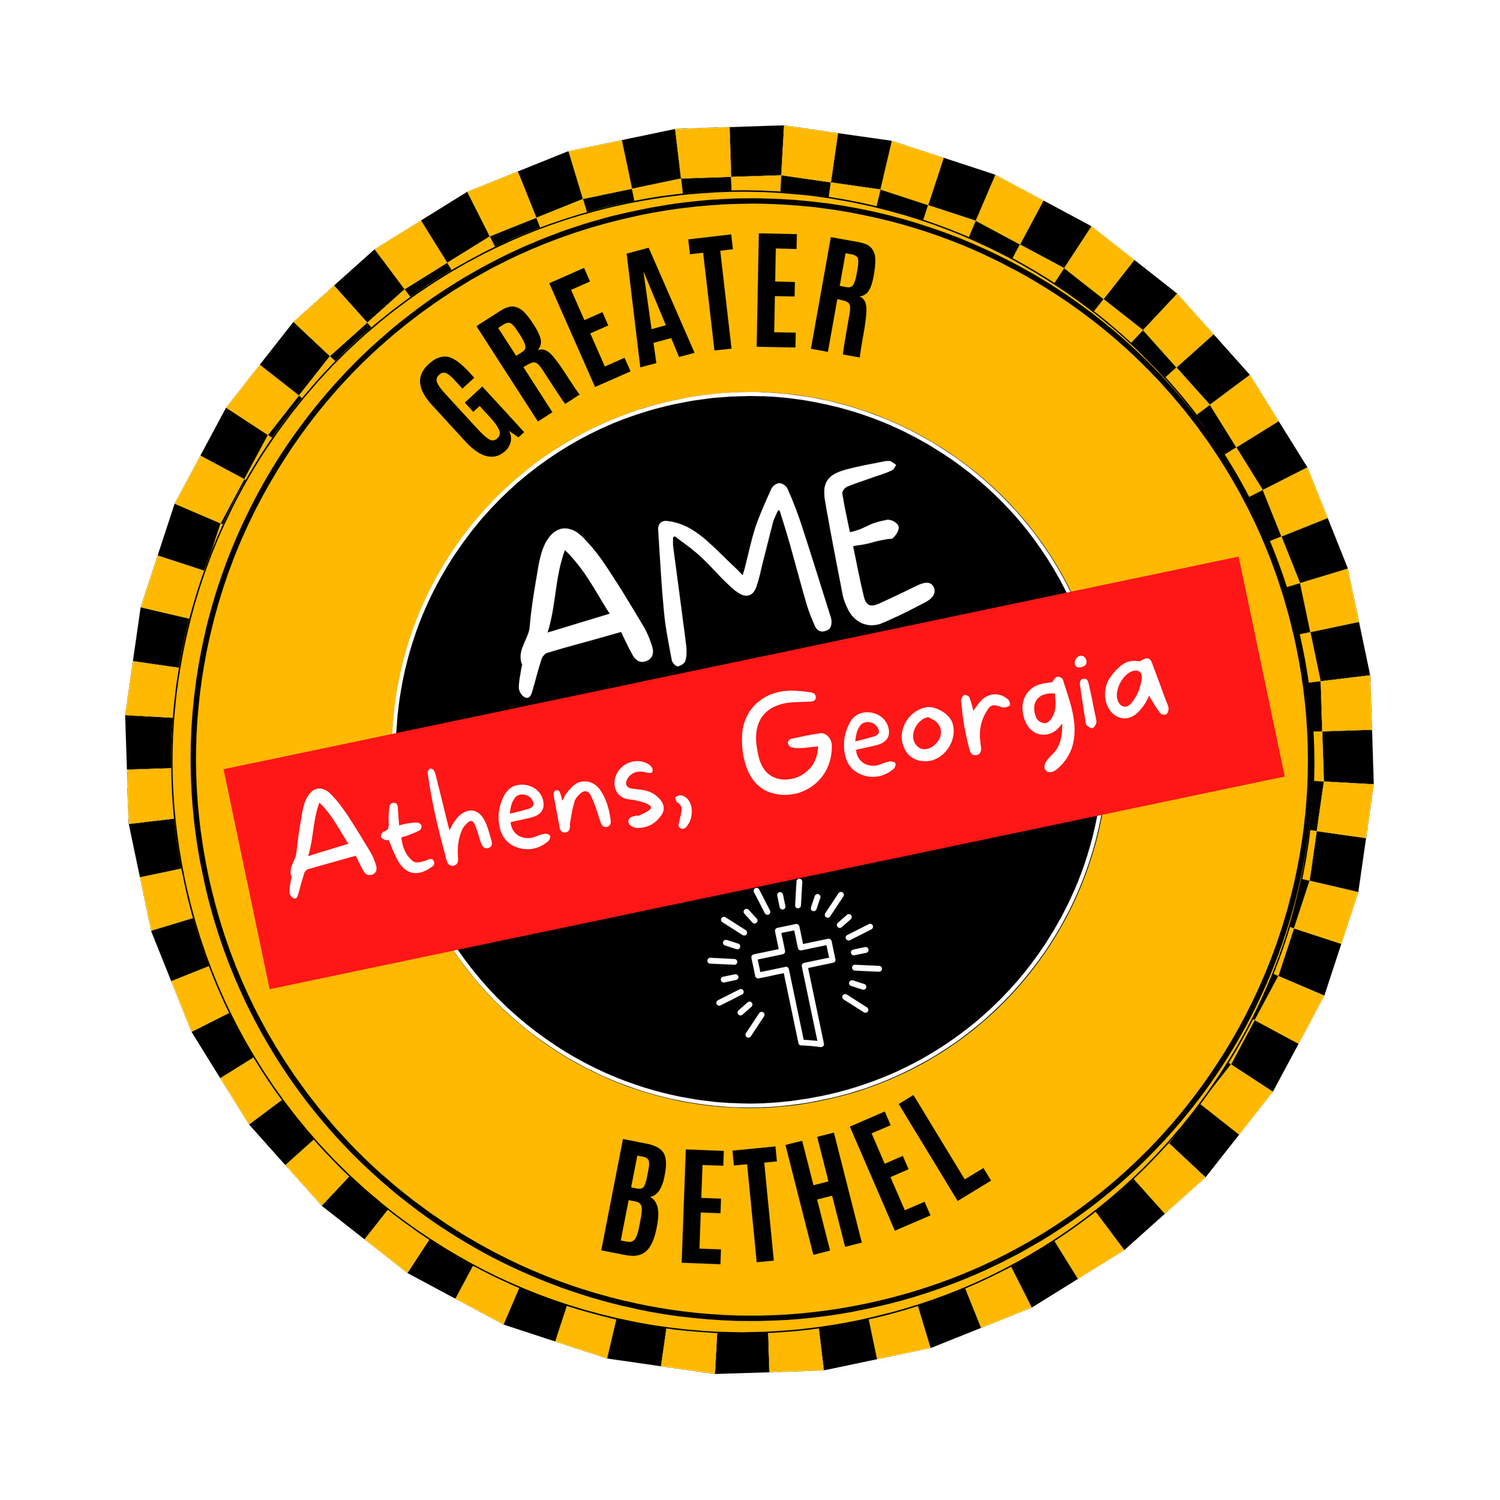 Greater Bethel AME - Athens 